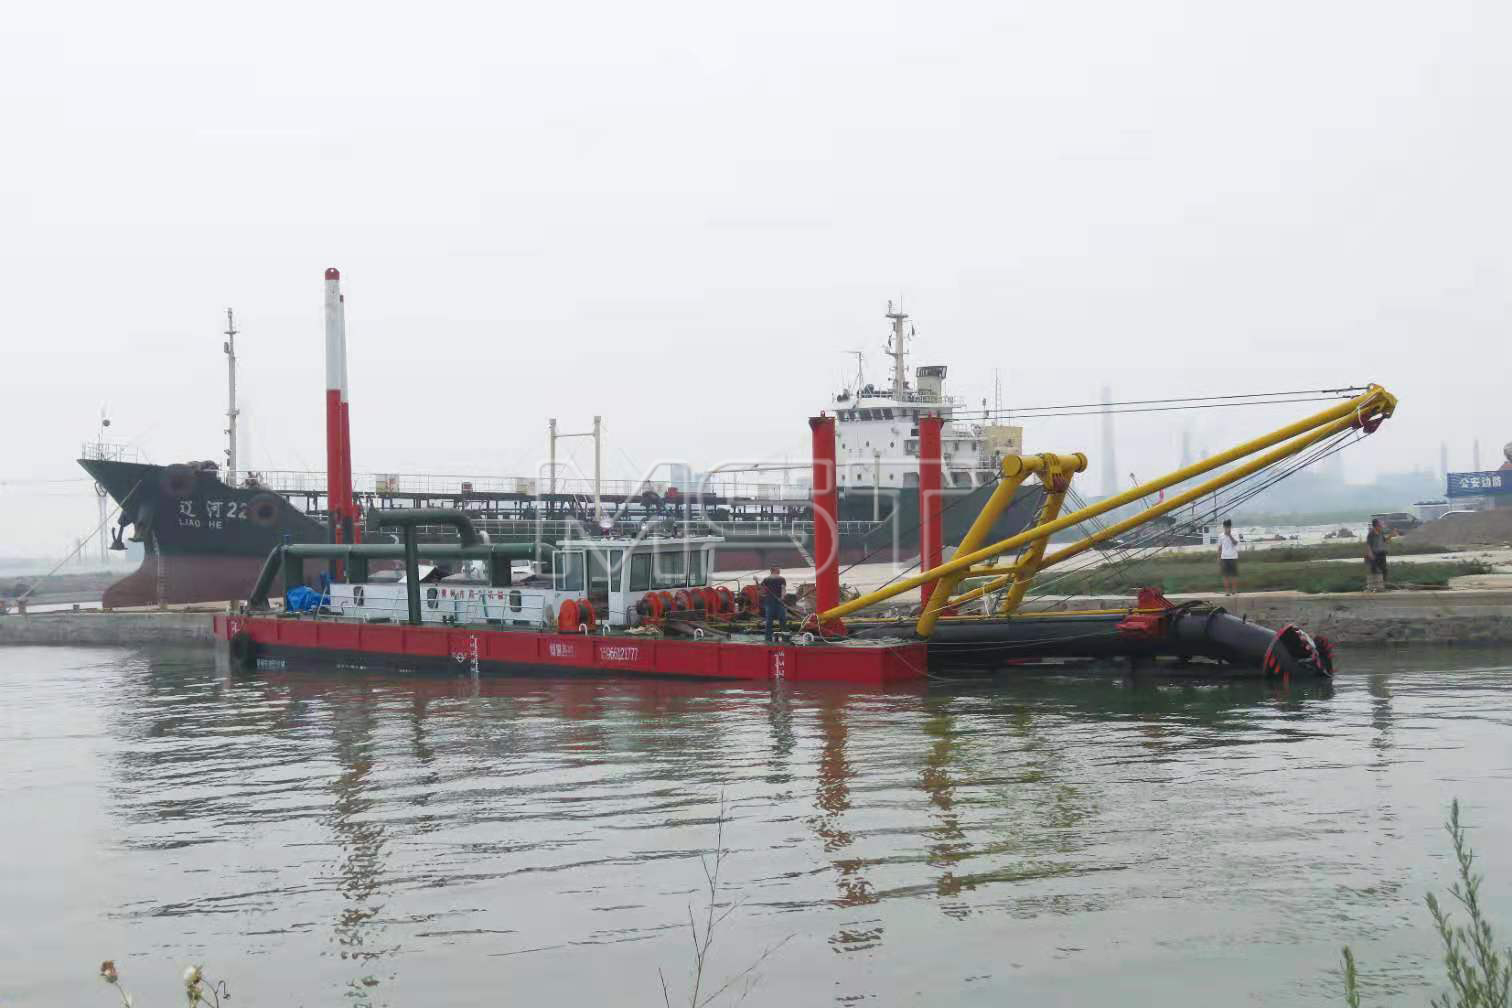 How to Determine the Depth of the Dredger?